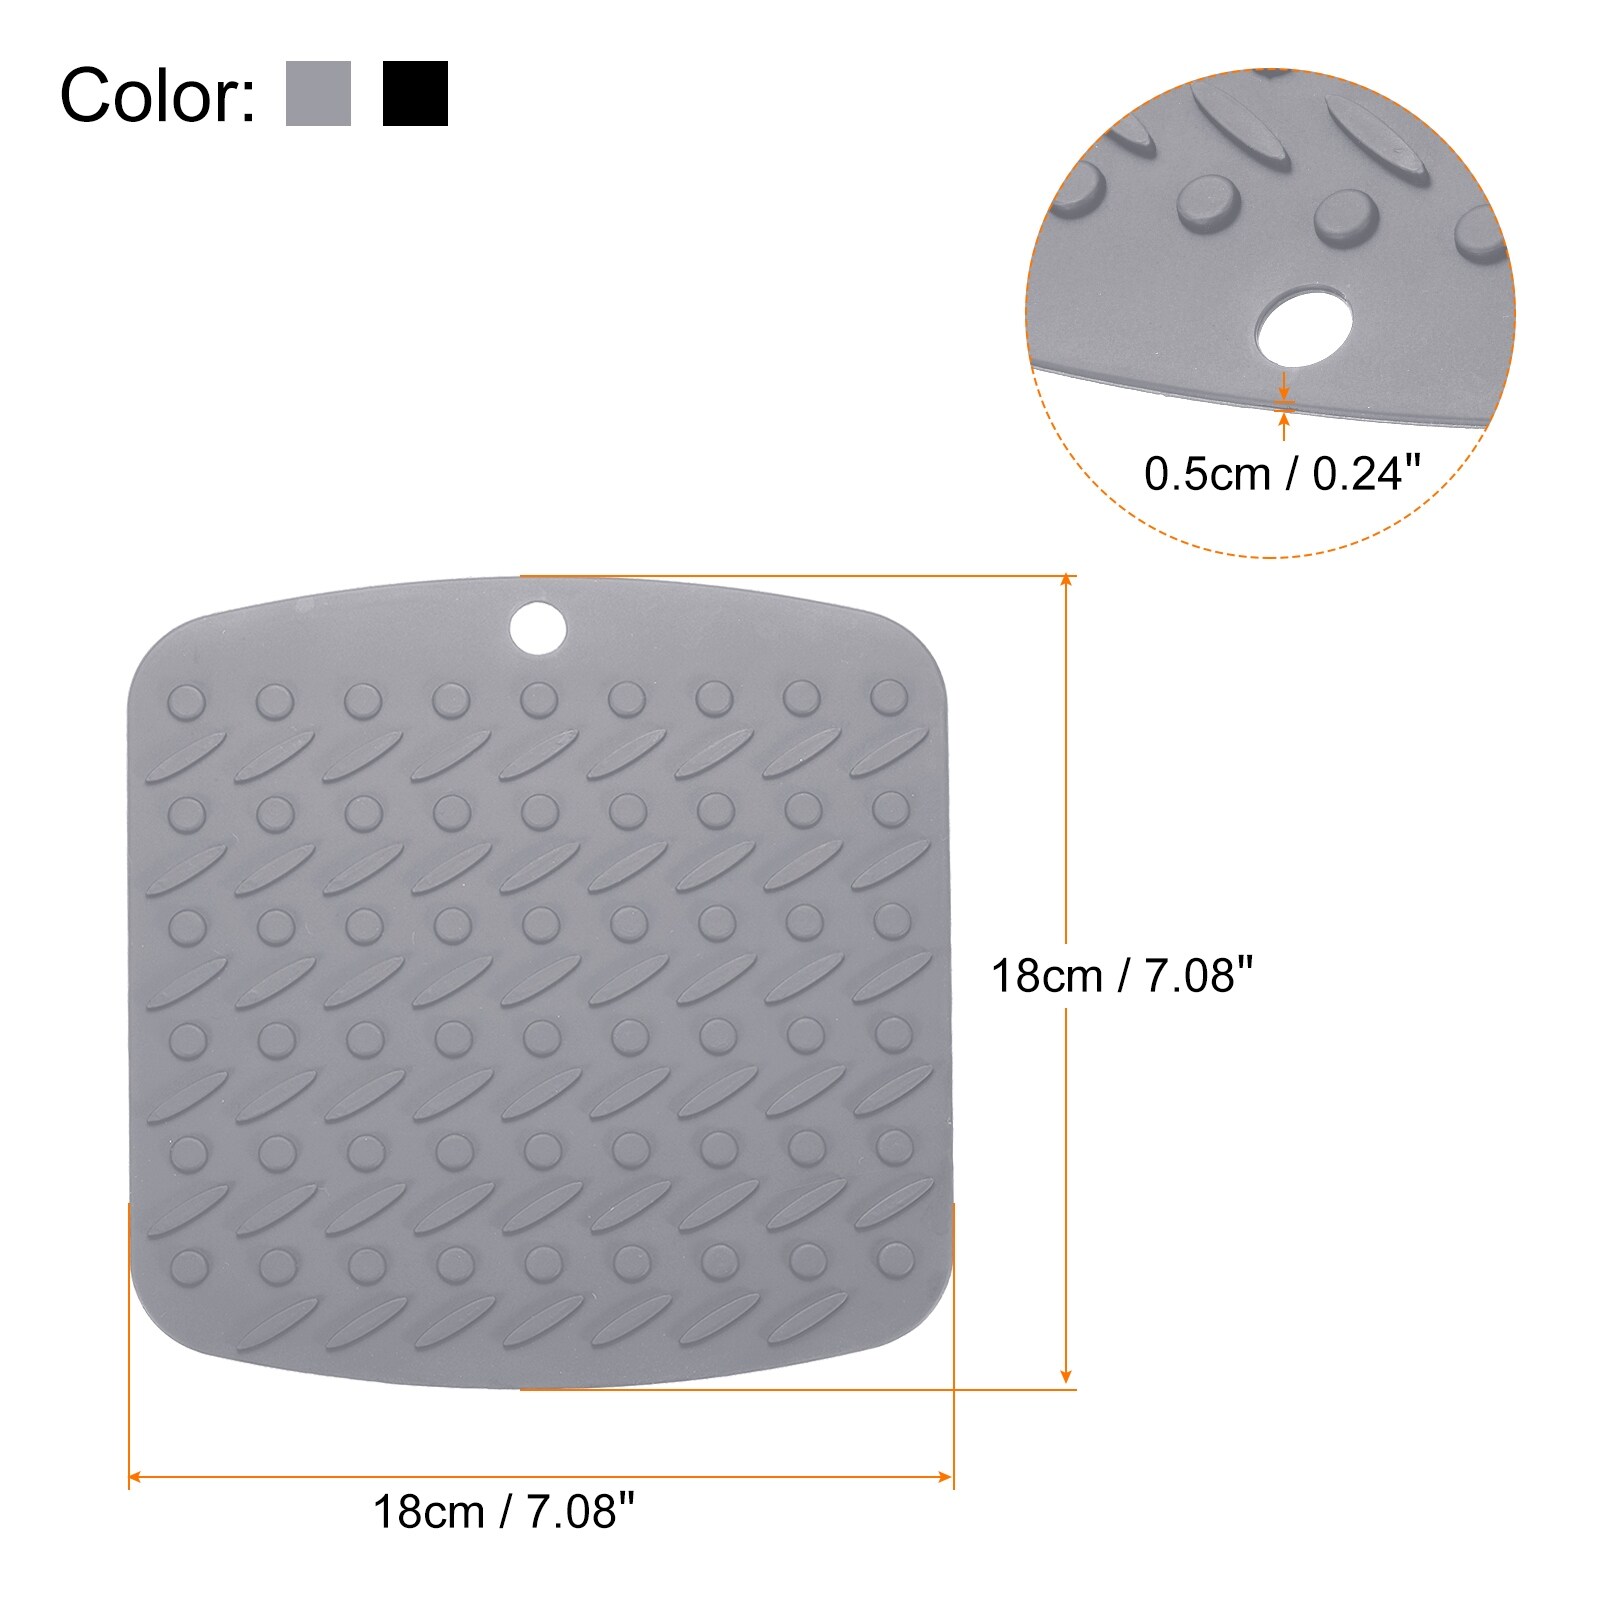 Twowood 3Pcs/Set Silicone Mat Heat Resistant Reusable Safe Table Hollow  Coster Pad for Home 